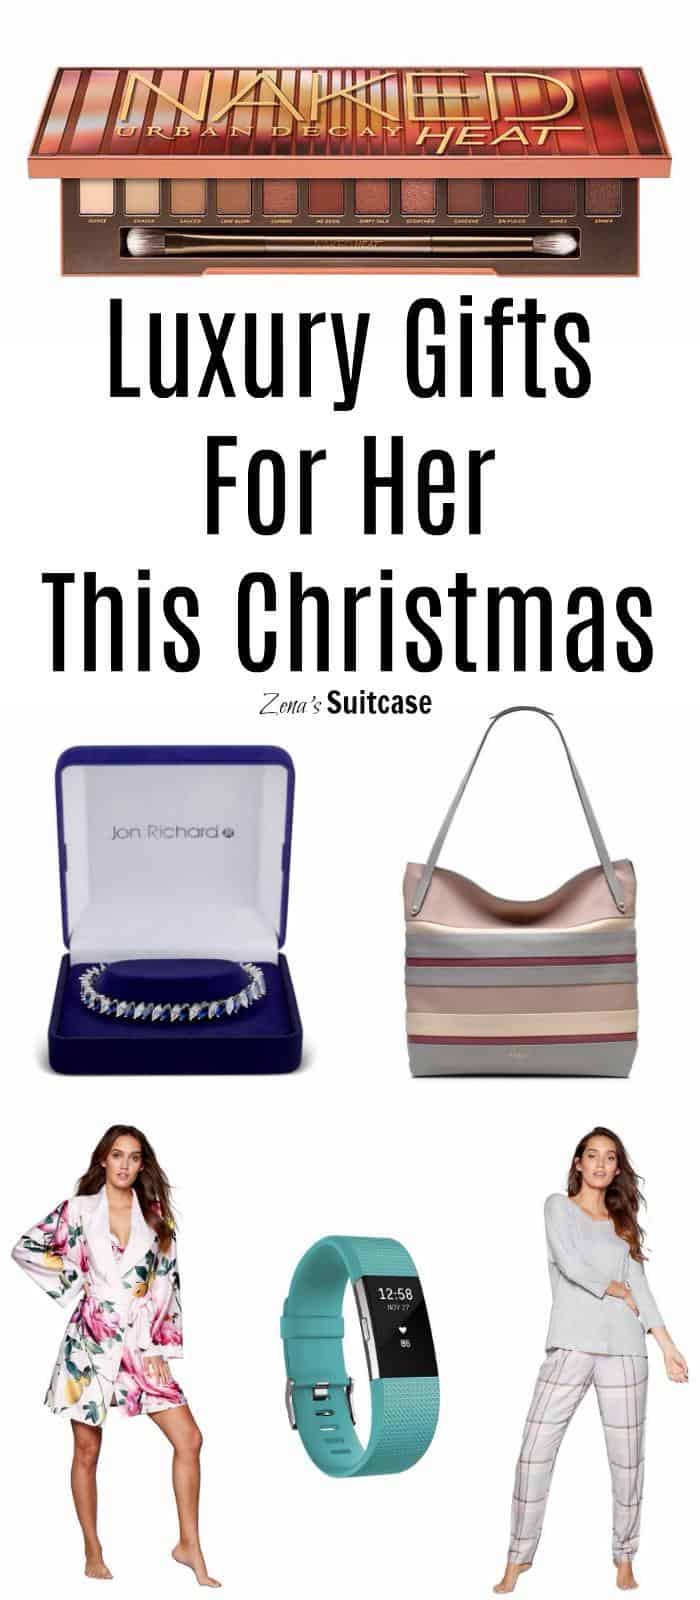 Luxury gifts for her this Christmas - complete Christmas gift guide to help you buy the perfect present this Christmas for your Mum, sister, girlfriend or friend 